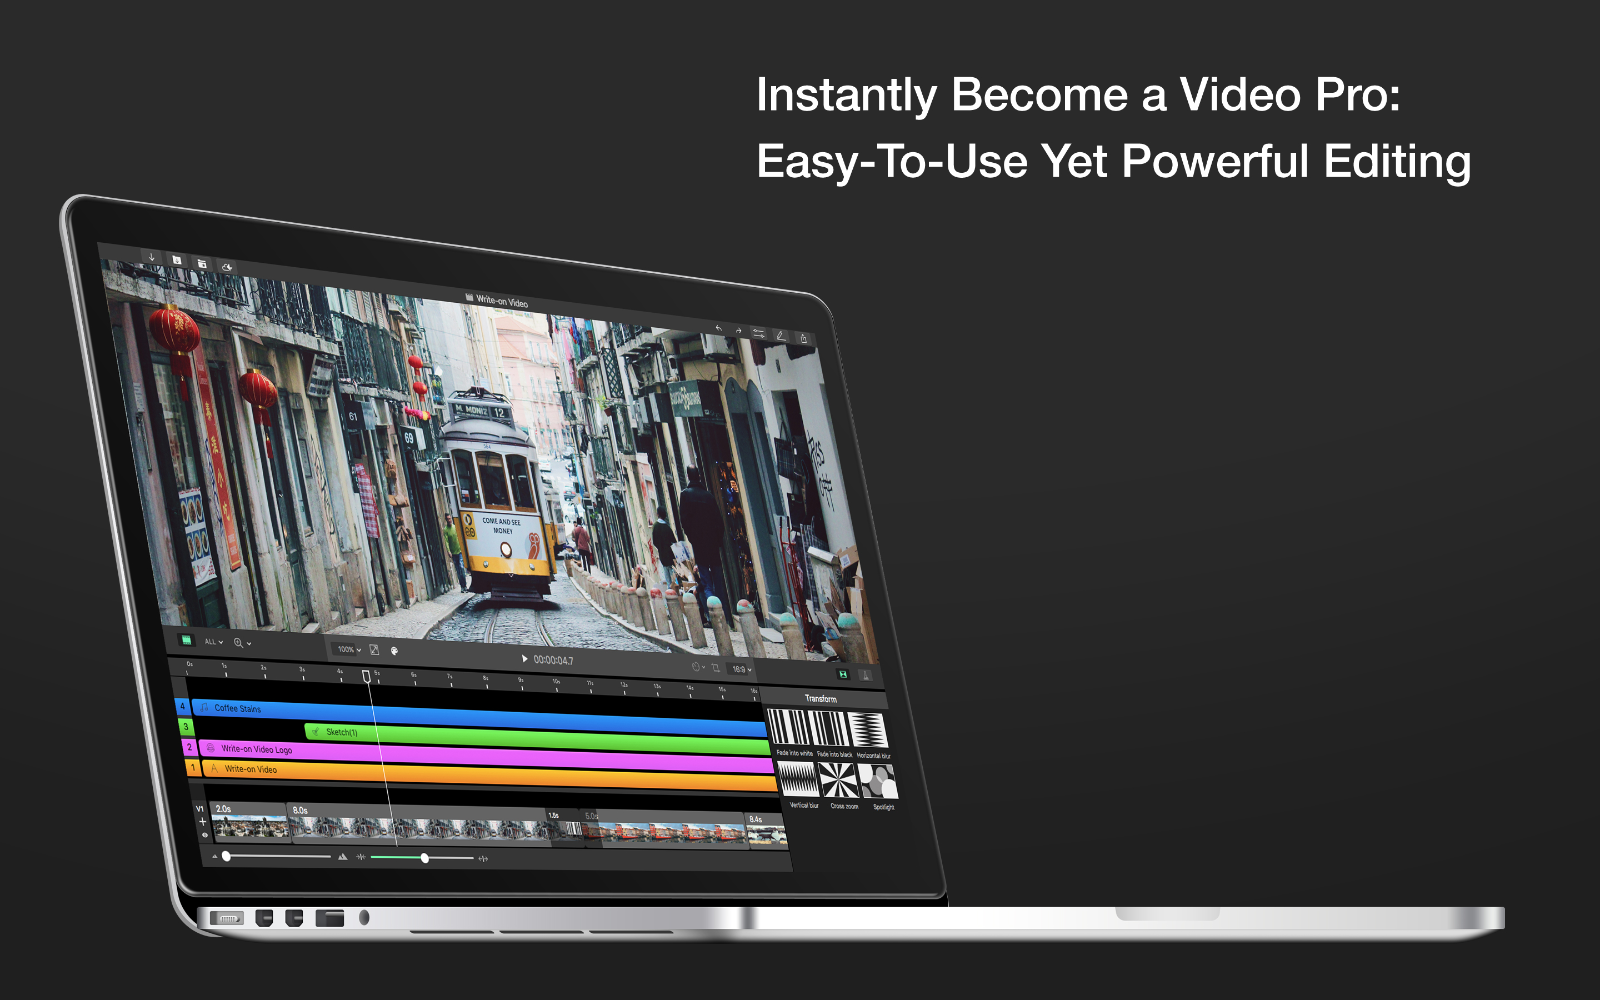 Influence & Inspire with Write-on Video for Mac: A Powerful, Easy-To-Use Video Editor